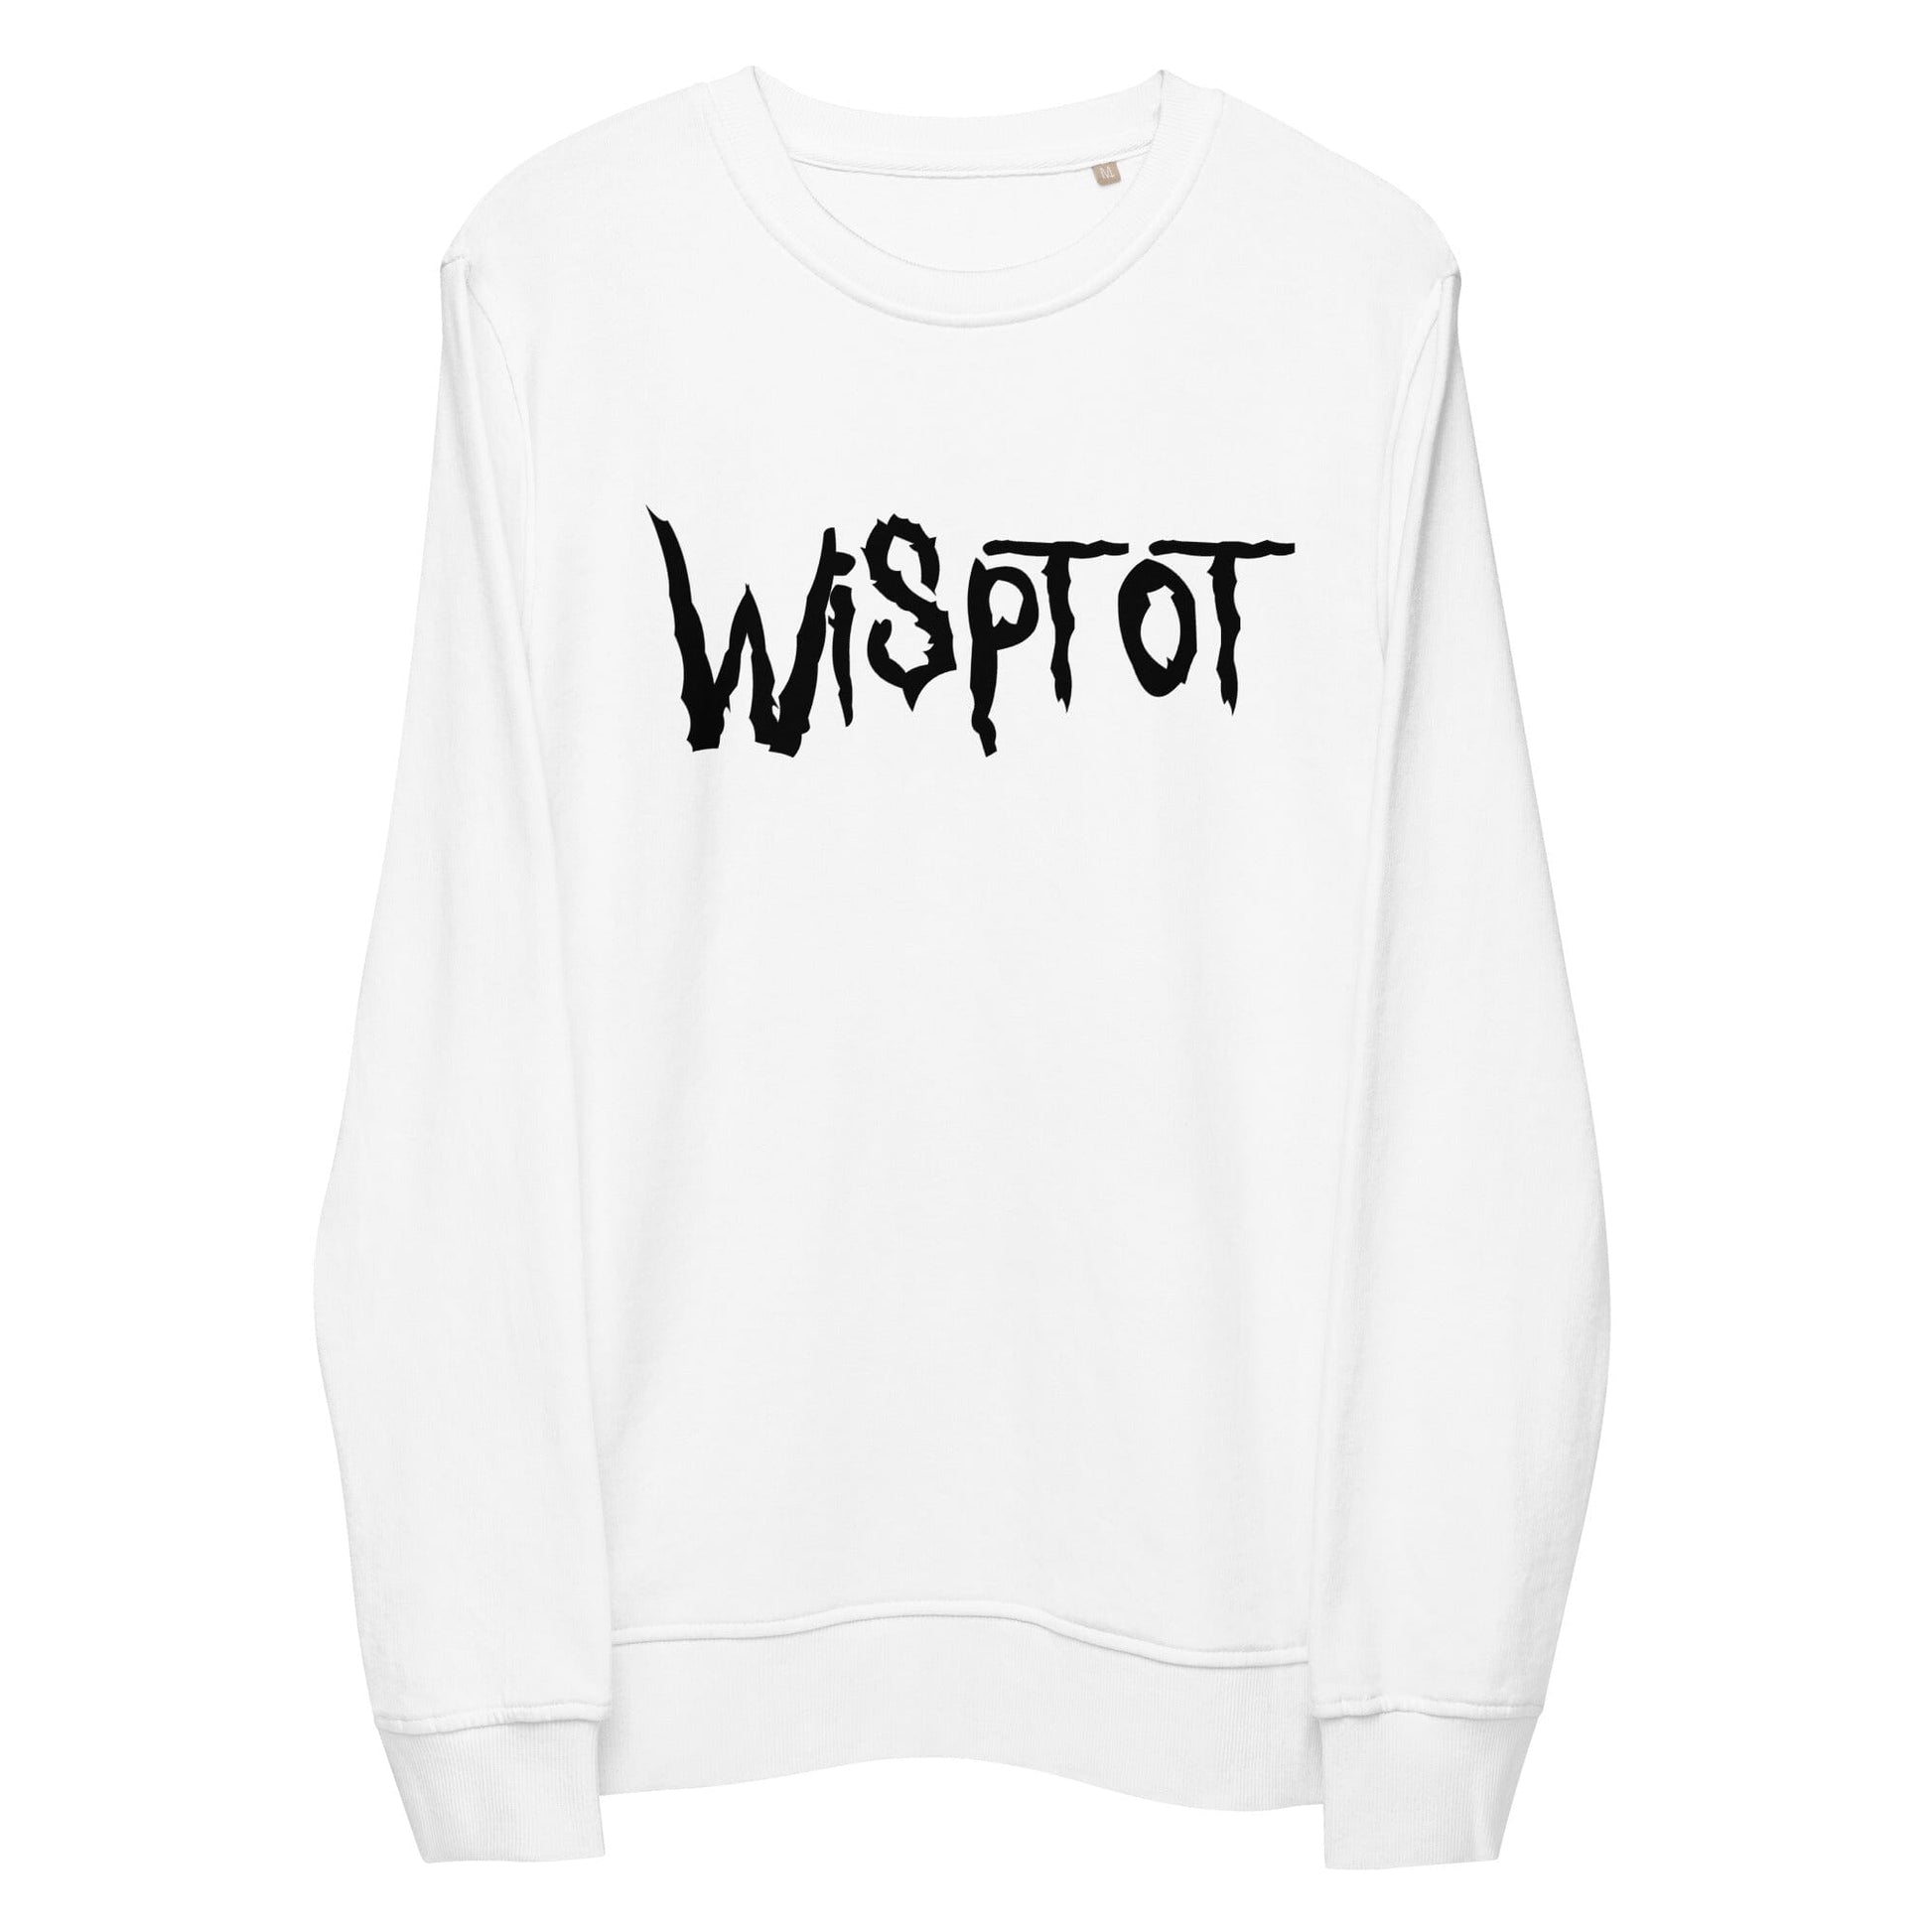 WispTot Sweatshirt [Unfoiled] (All net proceeds go to equally to Kitty CrusAIDe and Rags to Riches Animal Rescue) JoyousJoyfulJoyness White S 